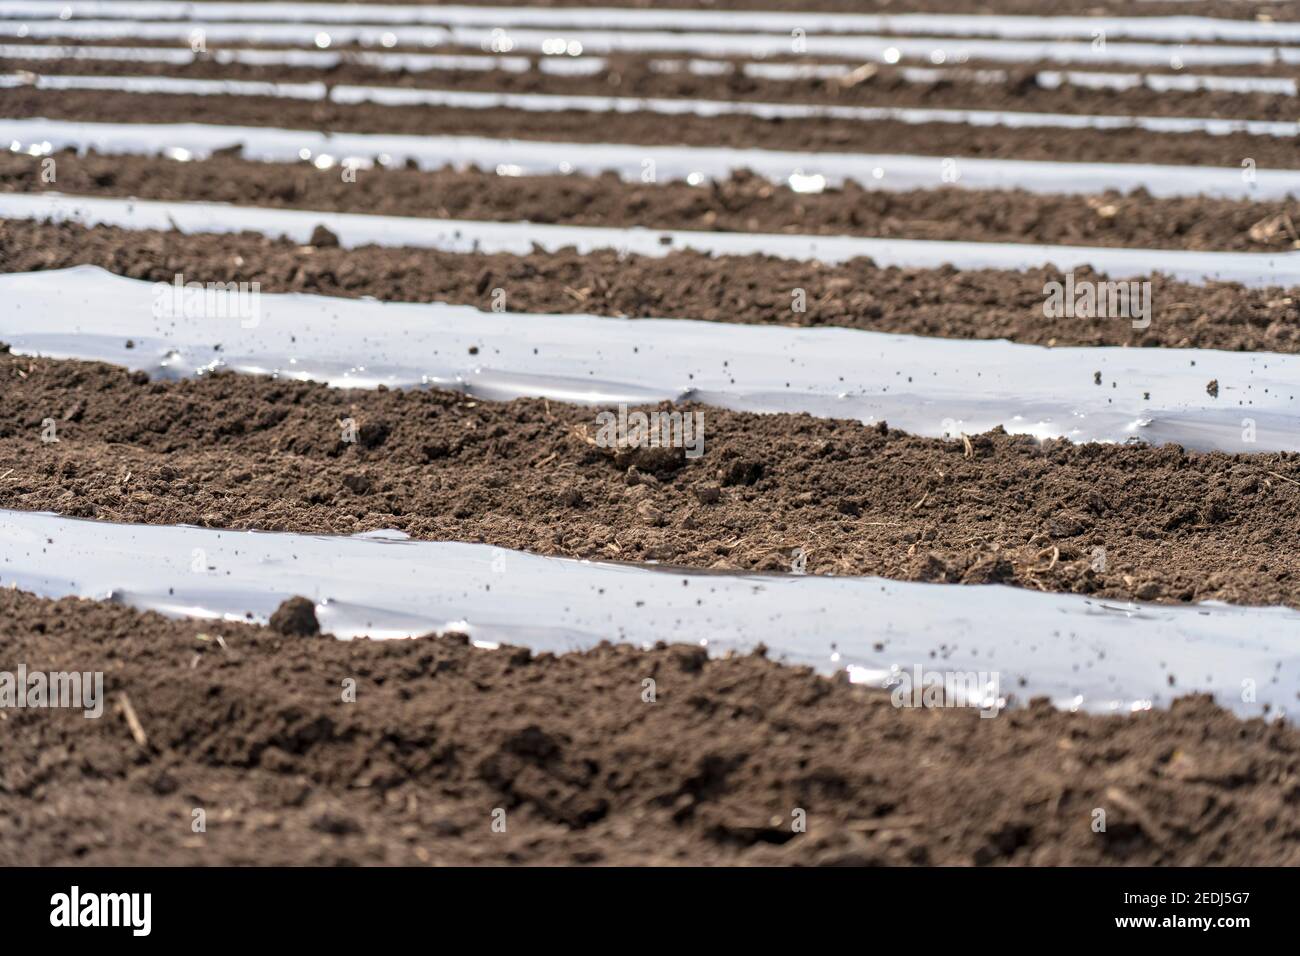 Farmland with Rows of Vegetable Beds Covered with Biodegradable Plastic Mulch Films. Installing Drip Tape Irrigation Under Plastic Mulch. Stock Photo